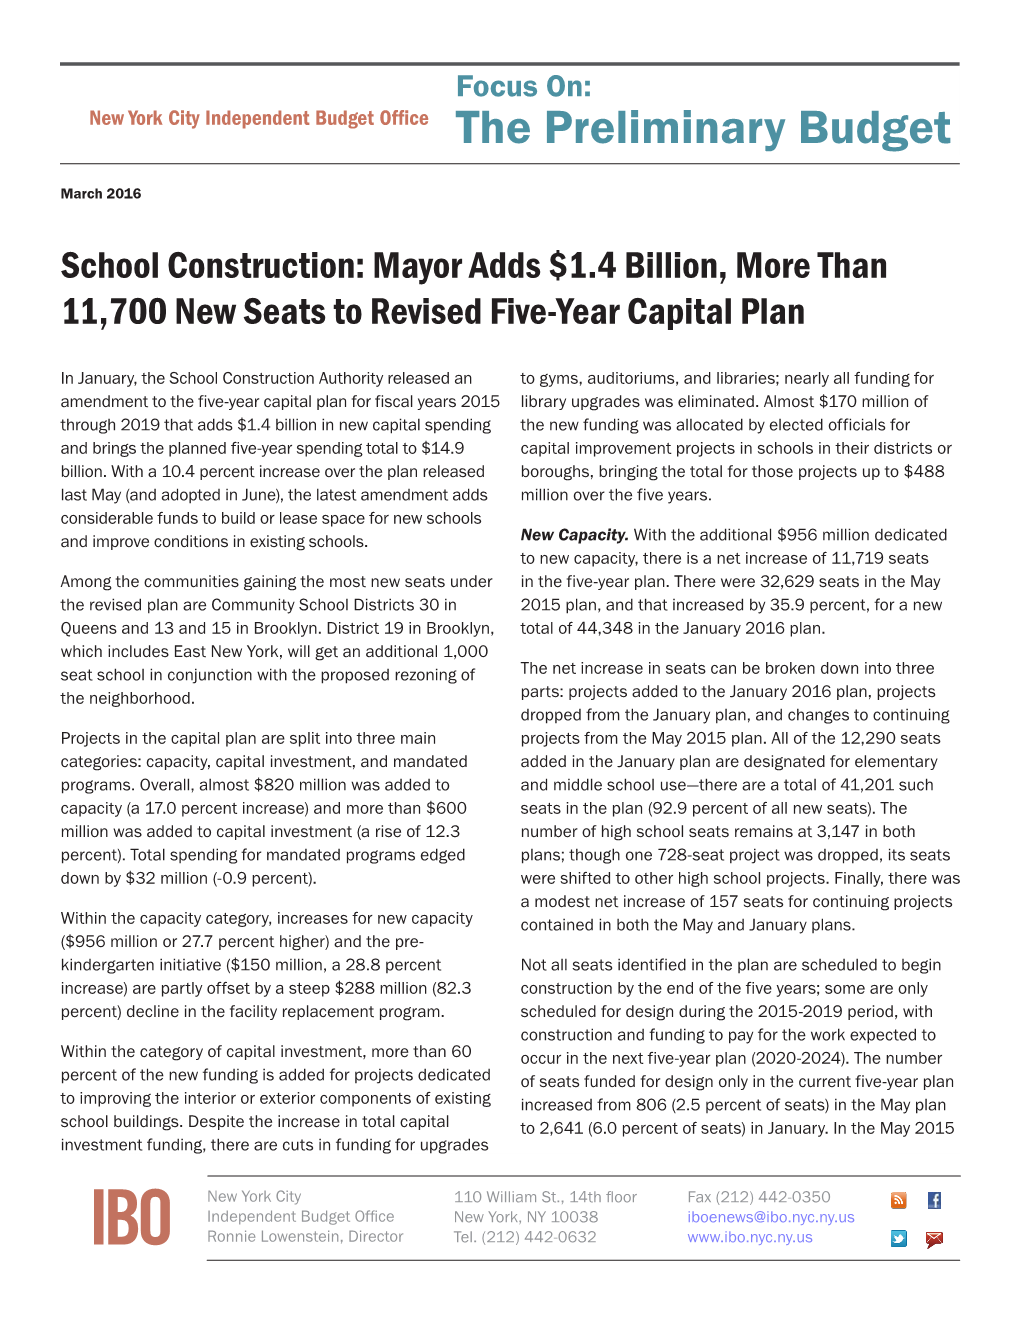 School Construction: Mayor Adds $1.4 Billion, More Than 11,700 New Seats to Revised Five-Year Capital Plan